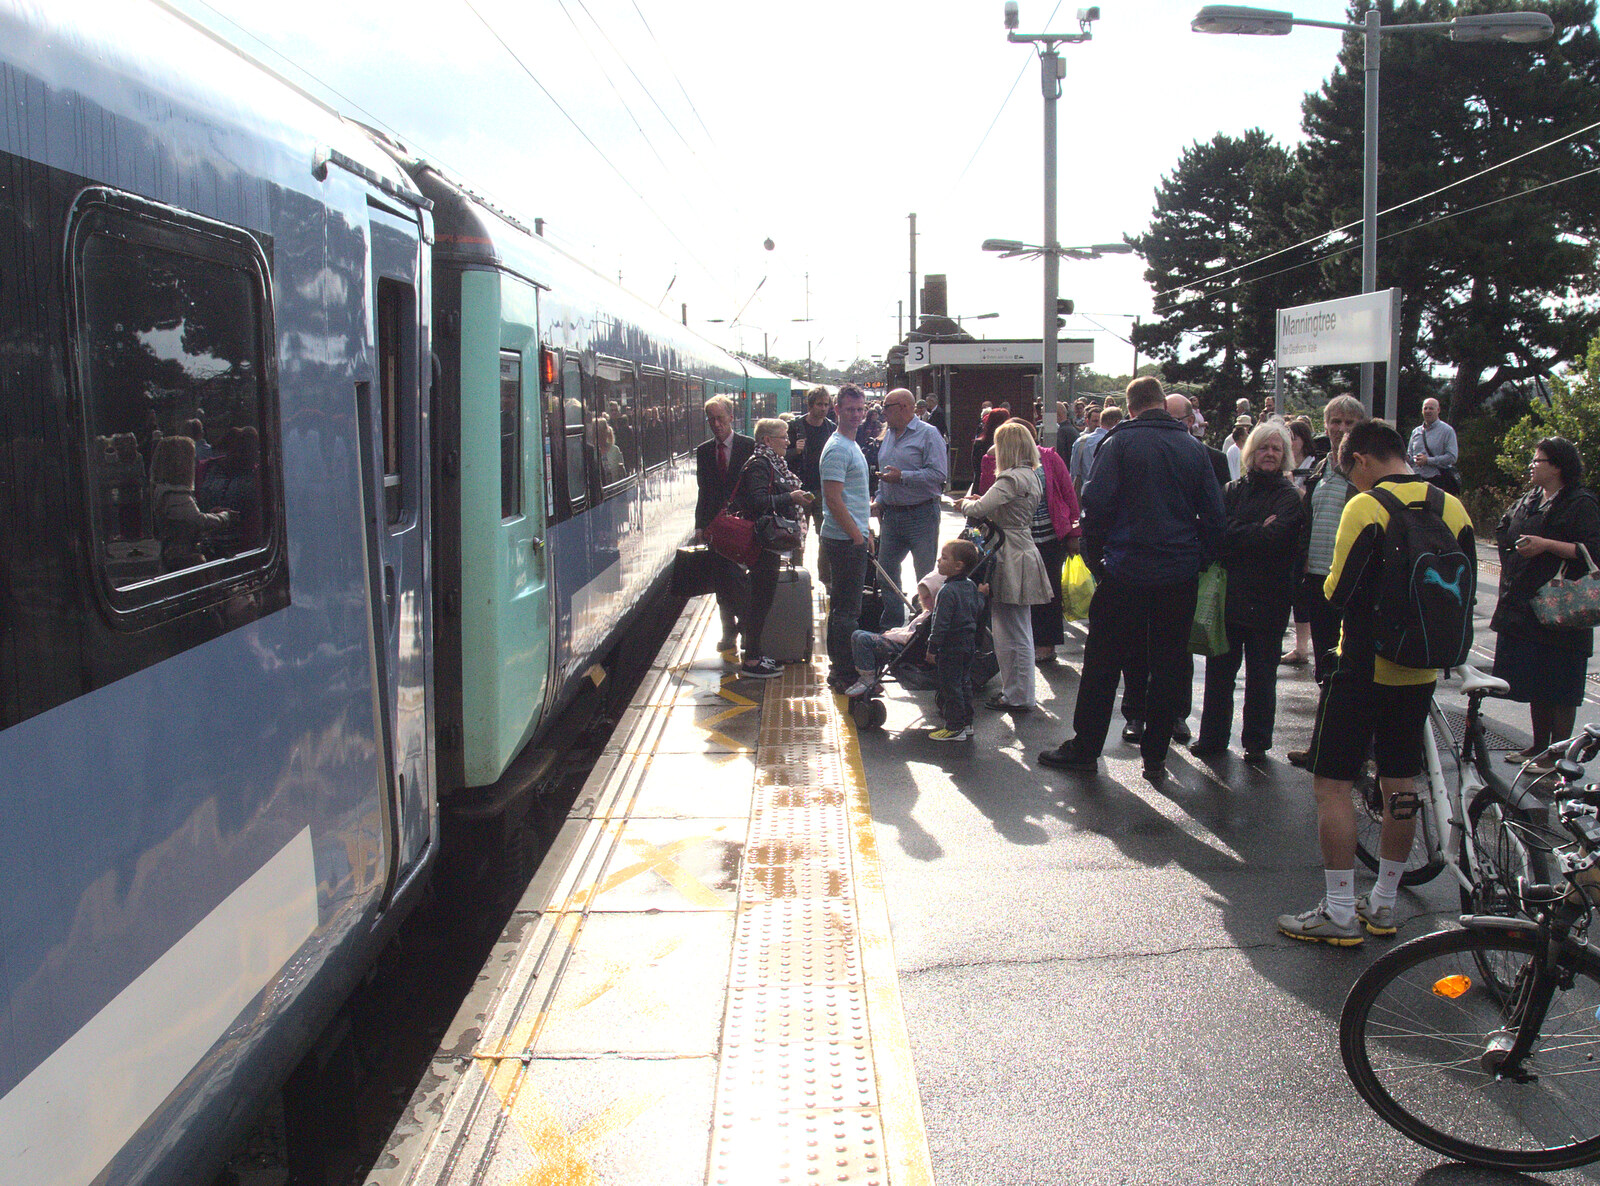 The train is terminated at Manningtree from Train Fails, and Pizza Pub, Manningtree and Southwark - 12th August 2014